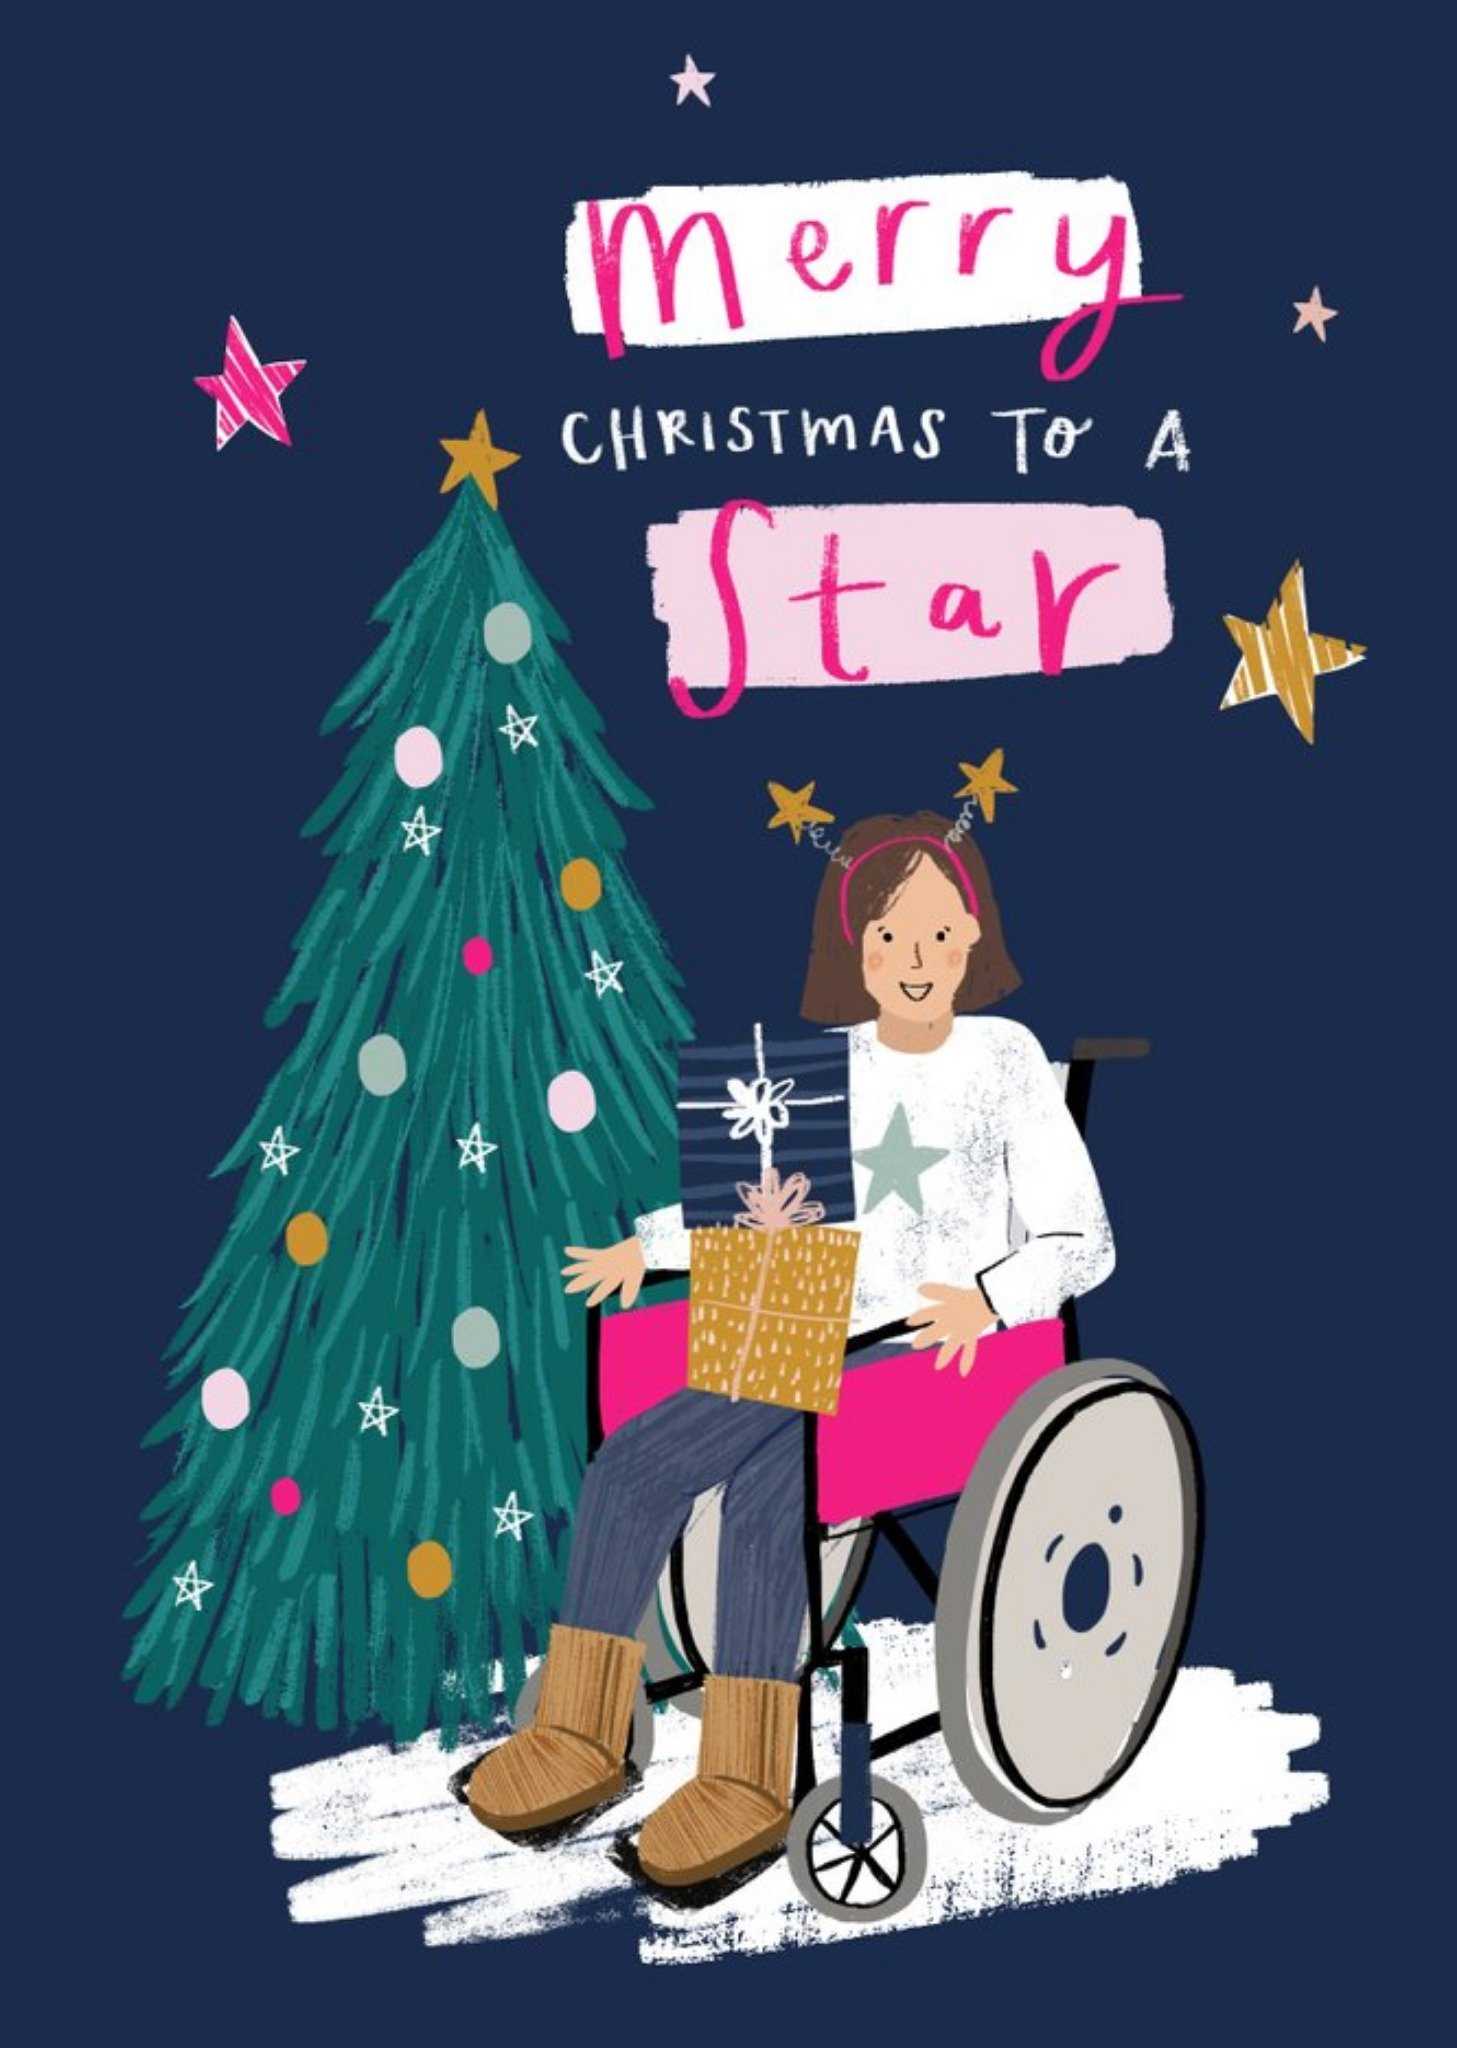 Moonpig Disabled Person Inclusive Merry Christmas To A Star Blue Christmas Card Ecard